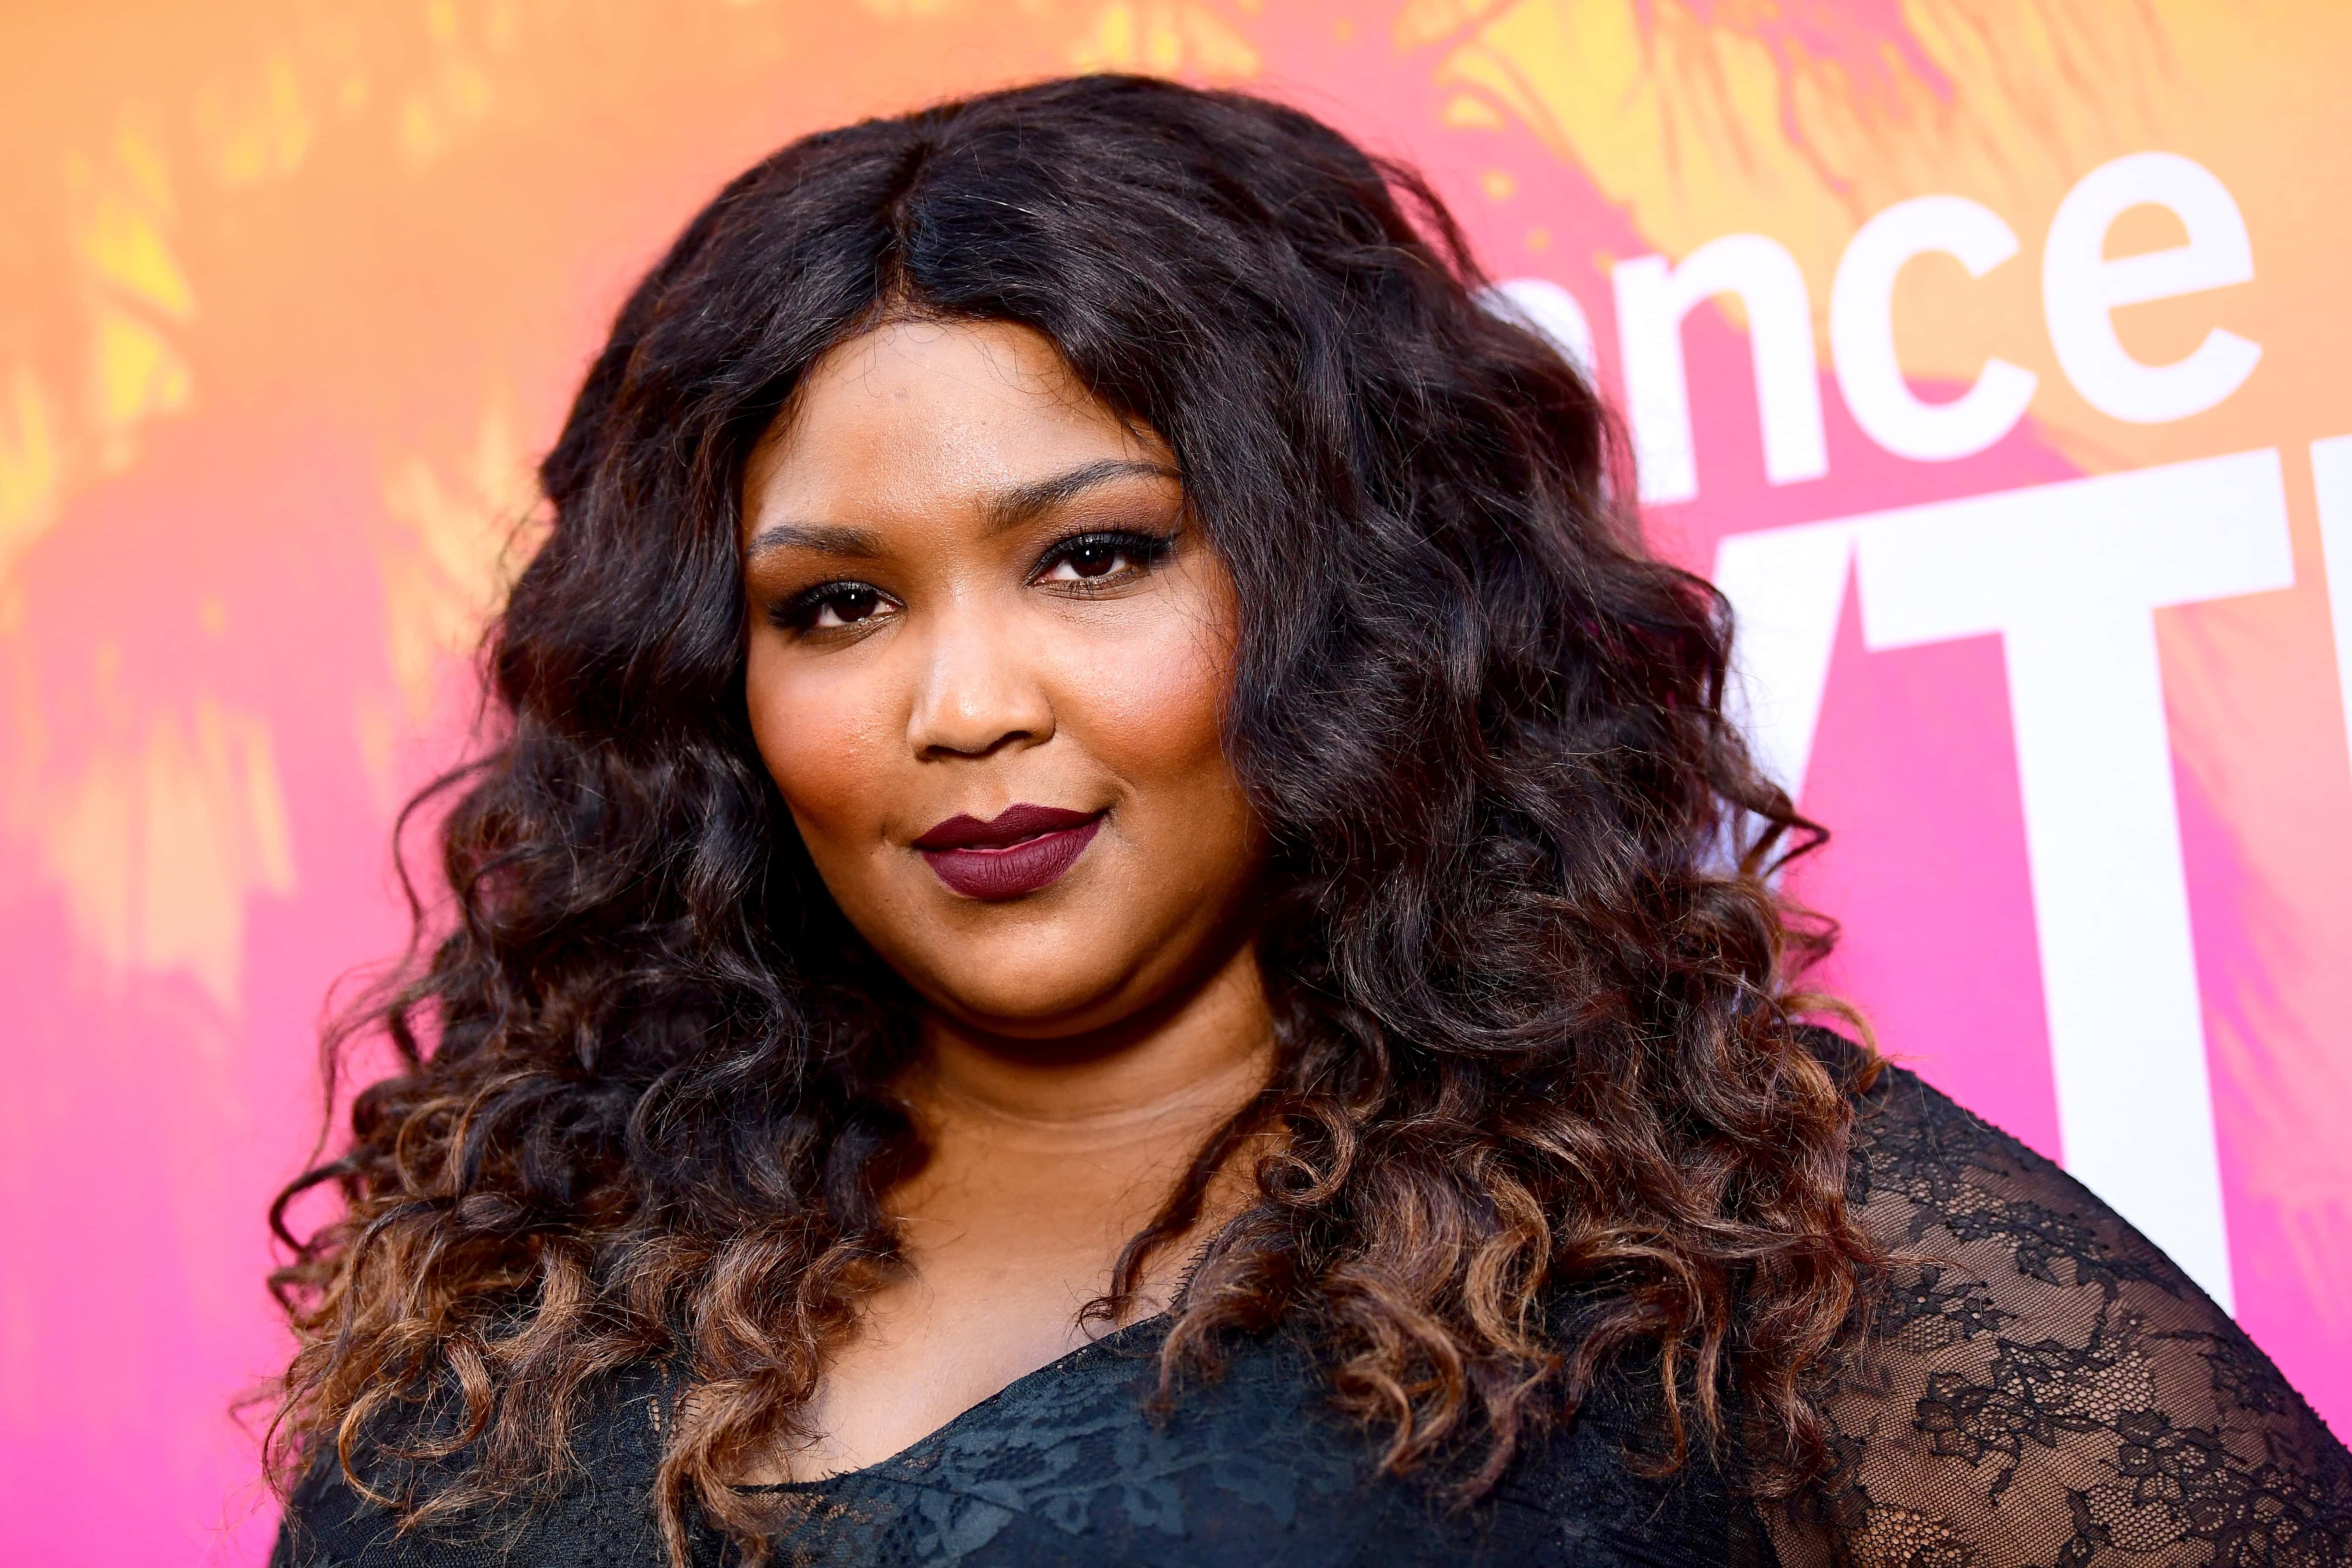 42 Juicy Facts About Lizzo The Goddess In All Of Us